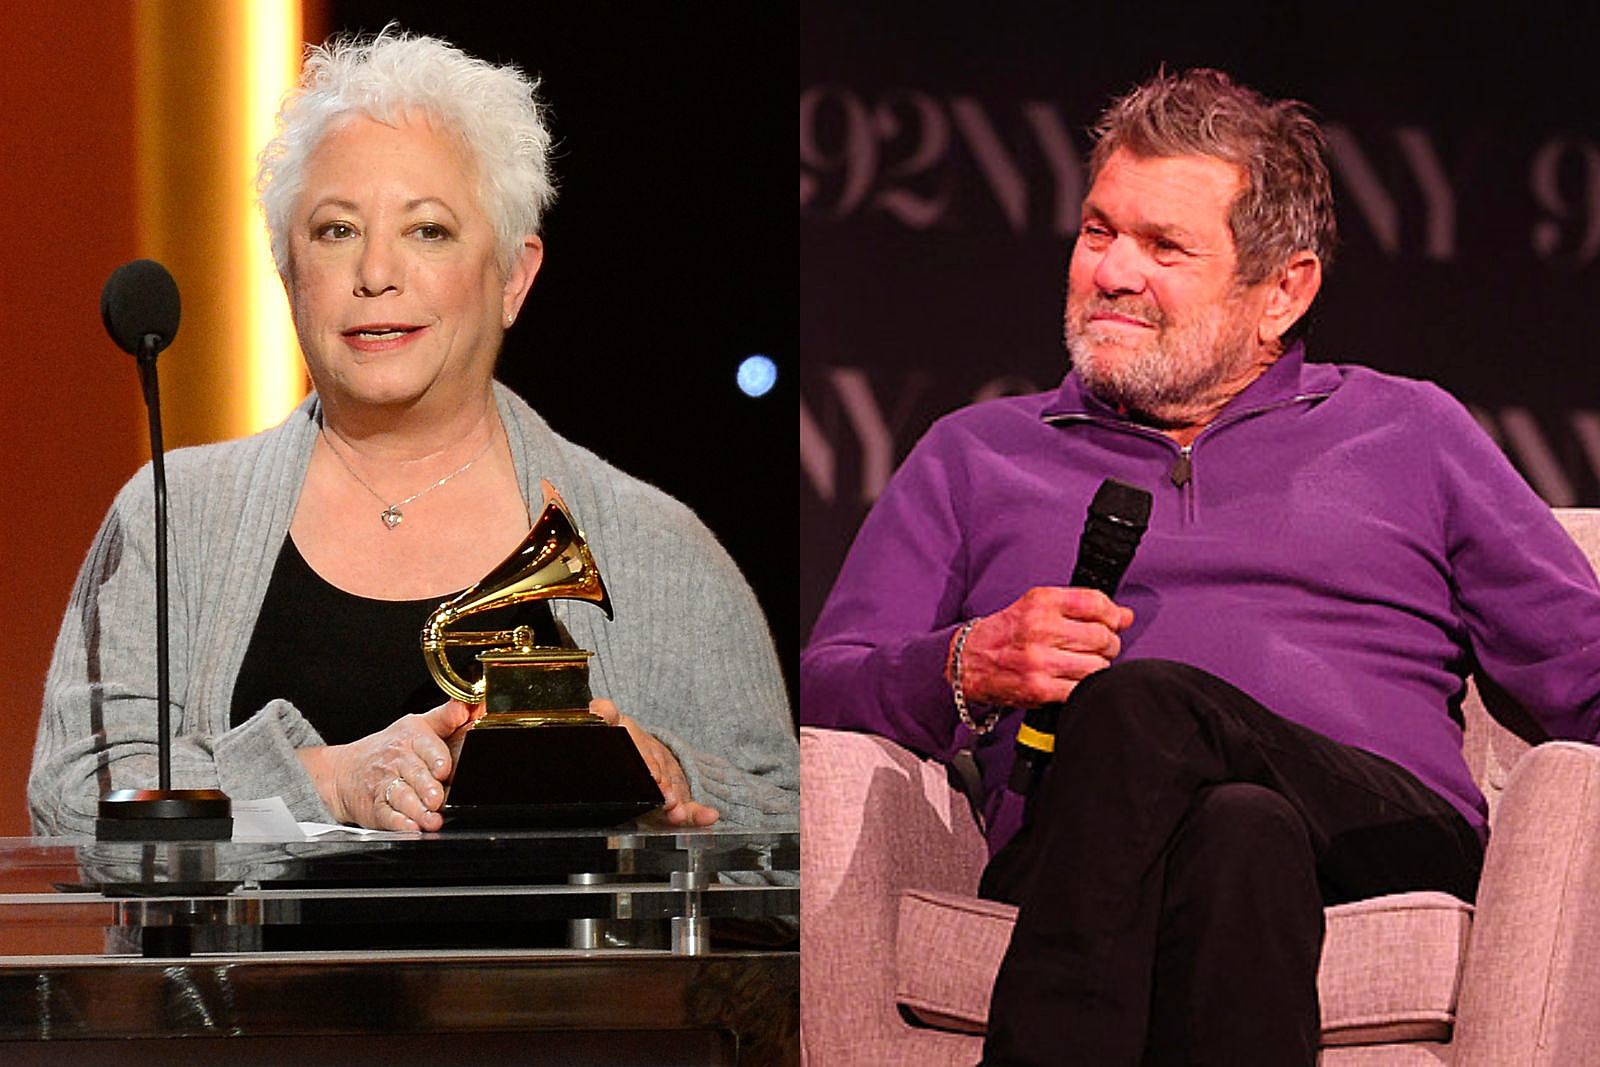 Janis Ian Weighs in on Jann Wenner’s Sexist Comments